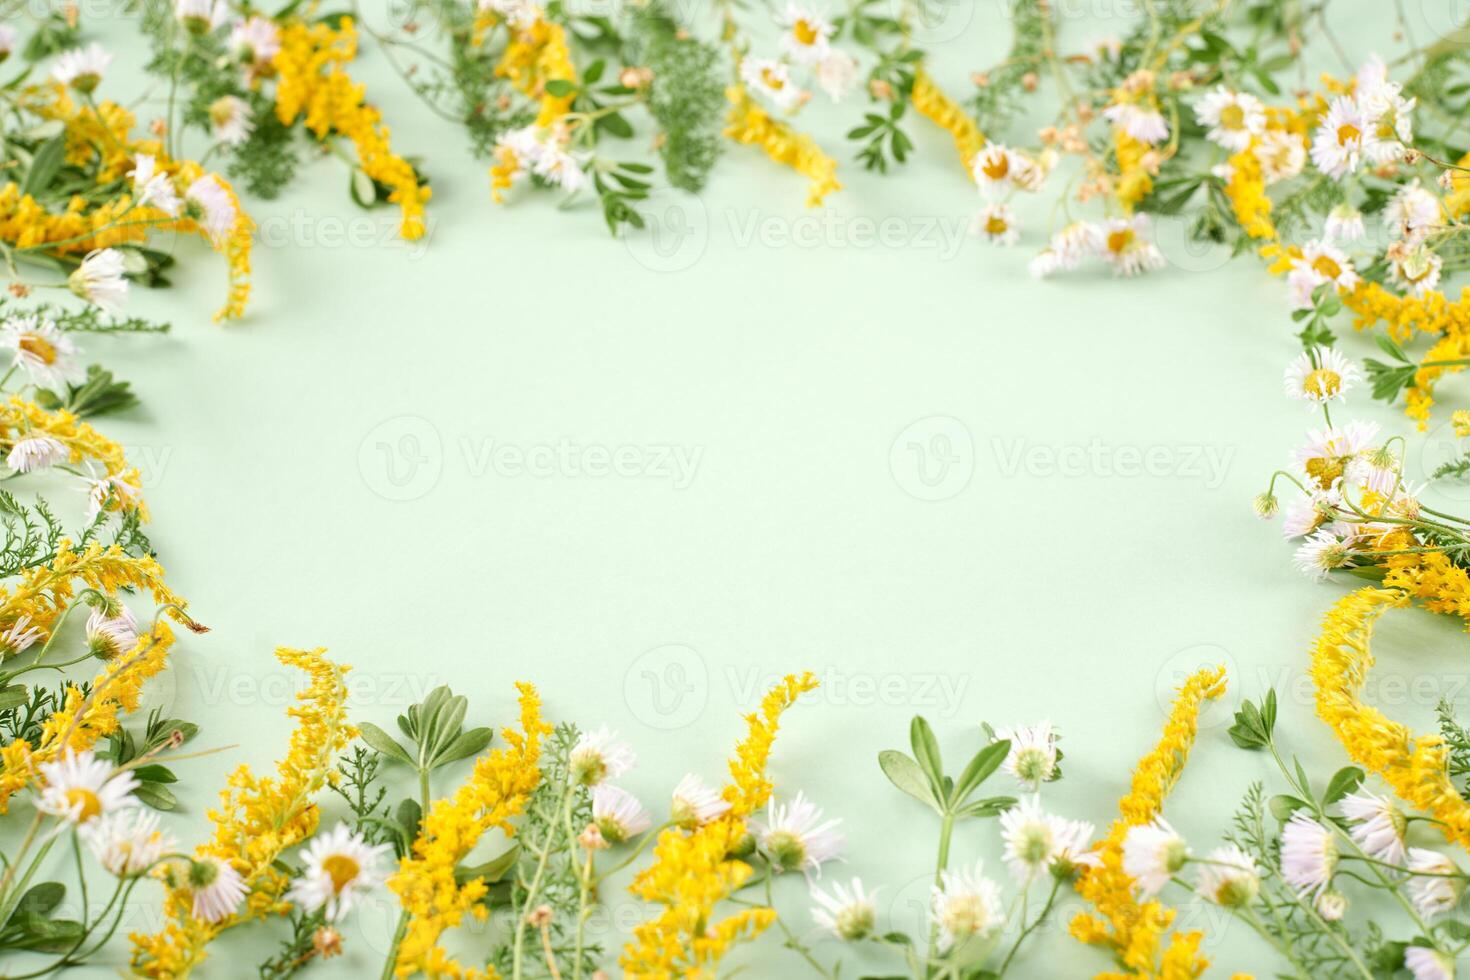 Green grass with little yellow white flowers as oval frame on light green background photo